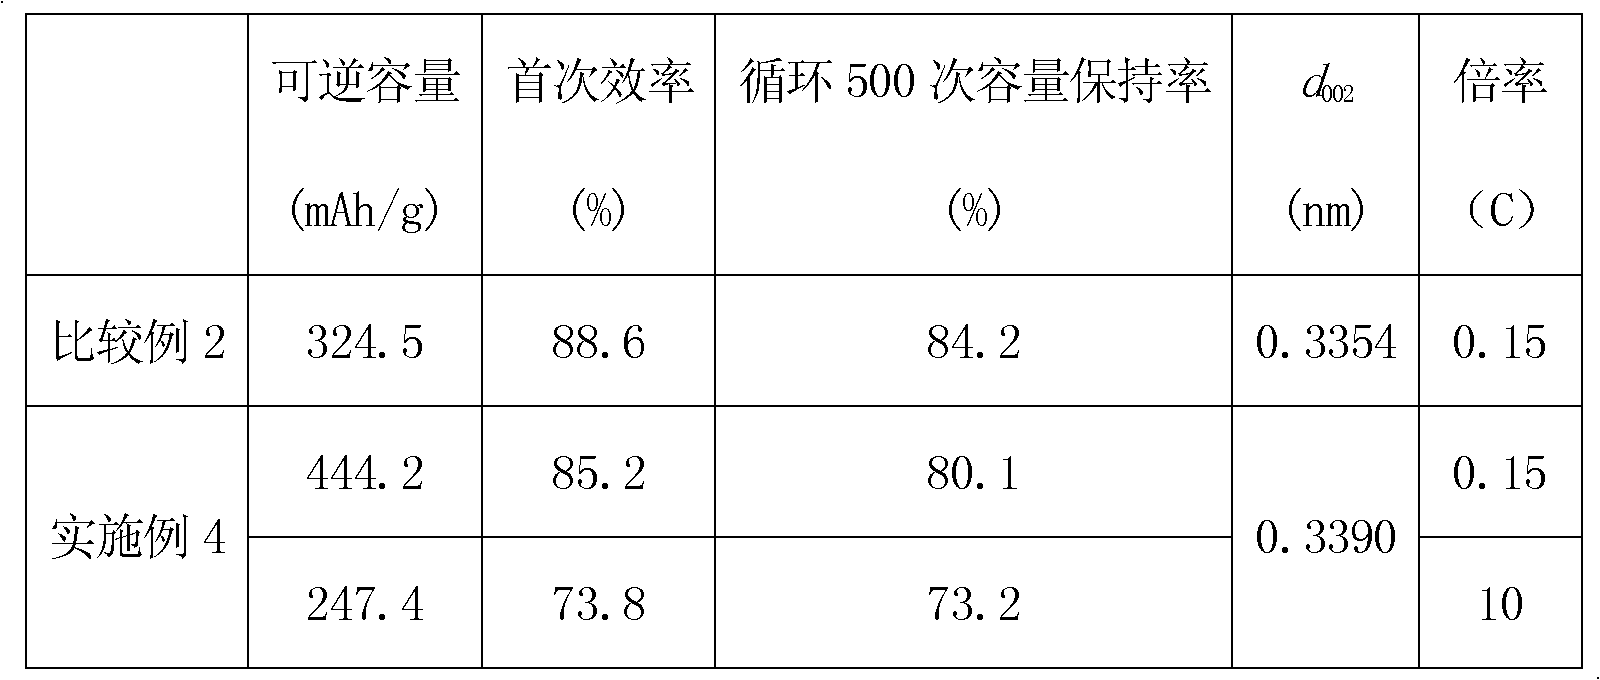 Carbon cladding layer expansion graphite composite material used for lithium ion batteries and preparation method thereof